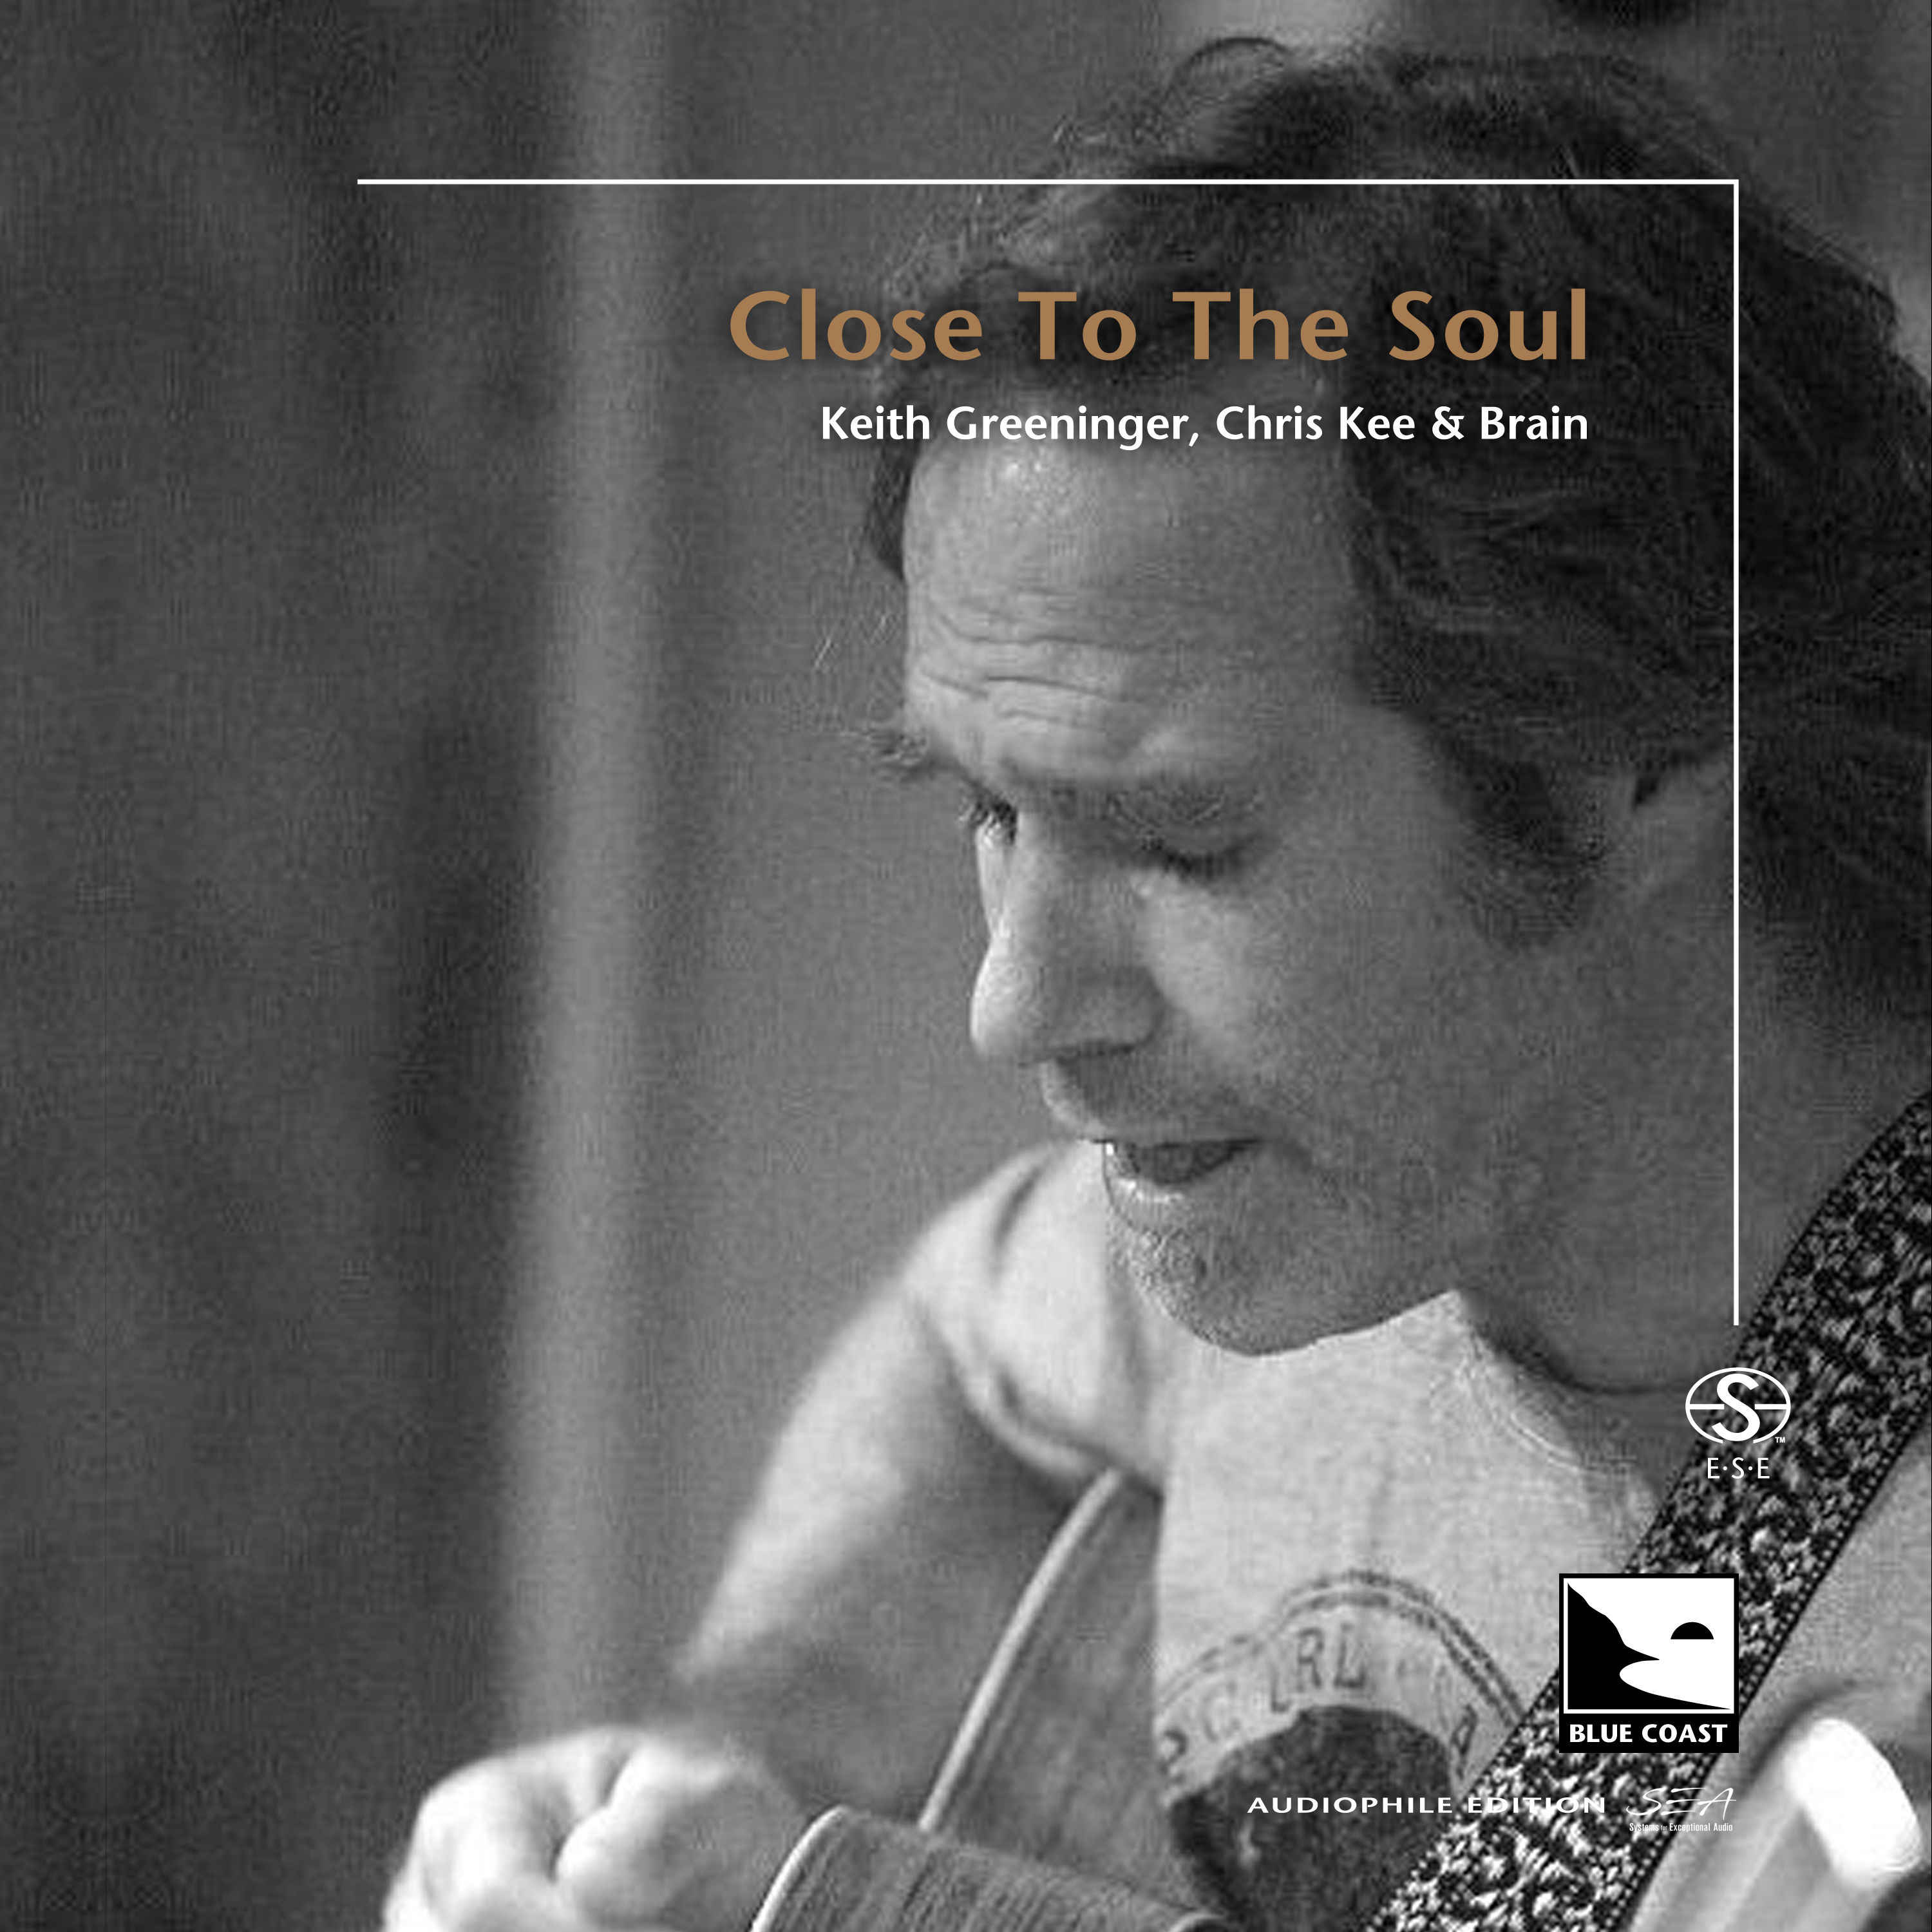 Keith Greeninger – Close To The Soul